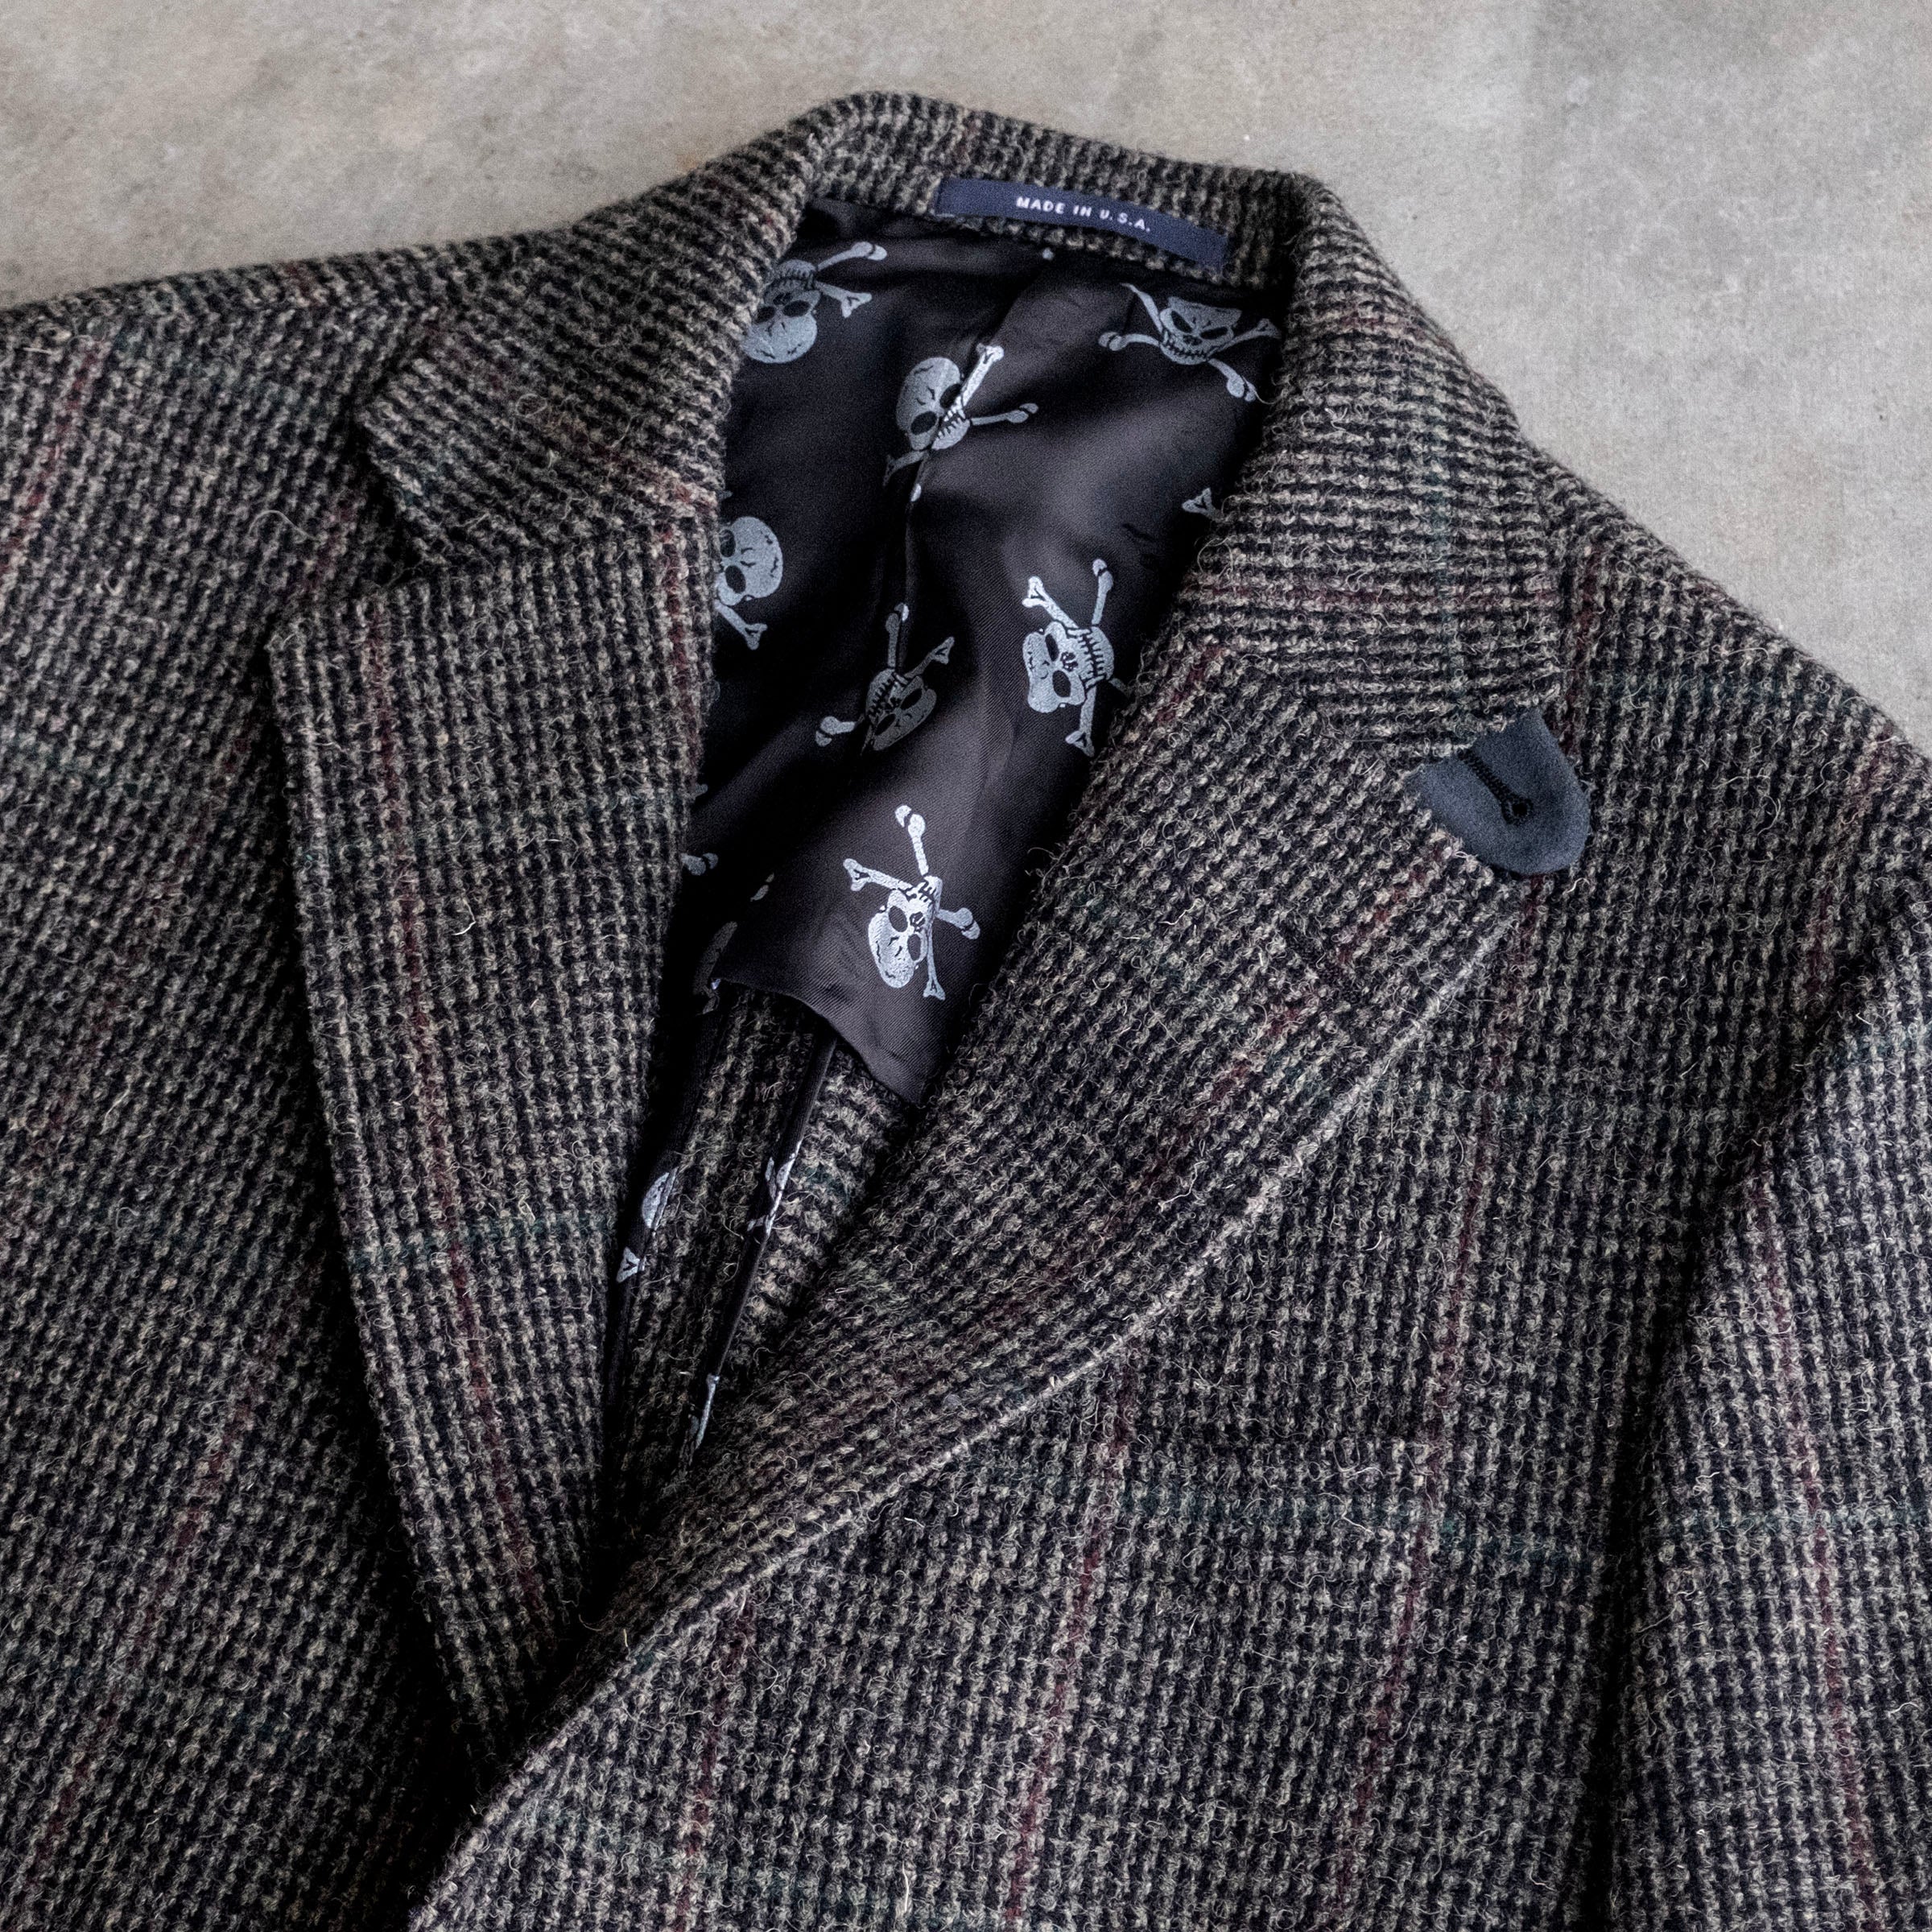 Sample Sale: Jaeger Jacket in Iron Forest Tweed Sz 40